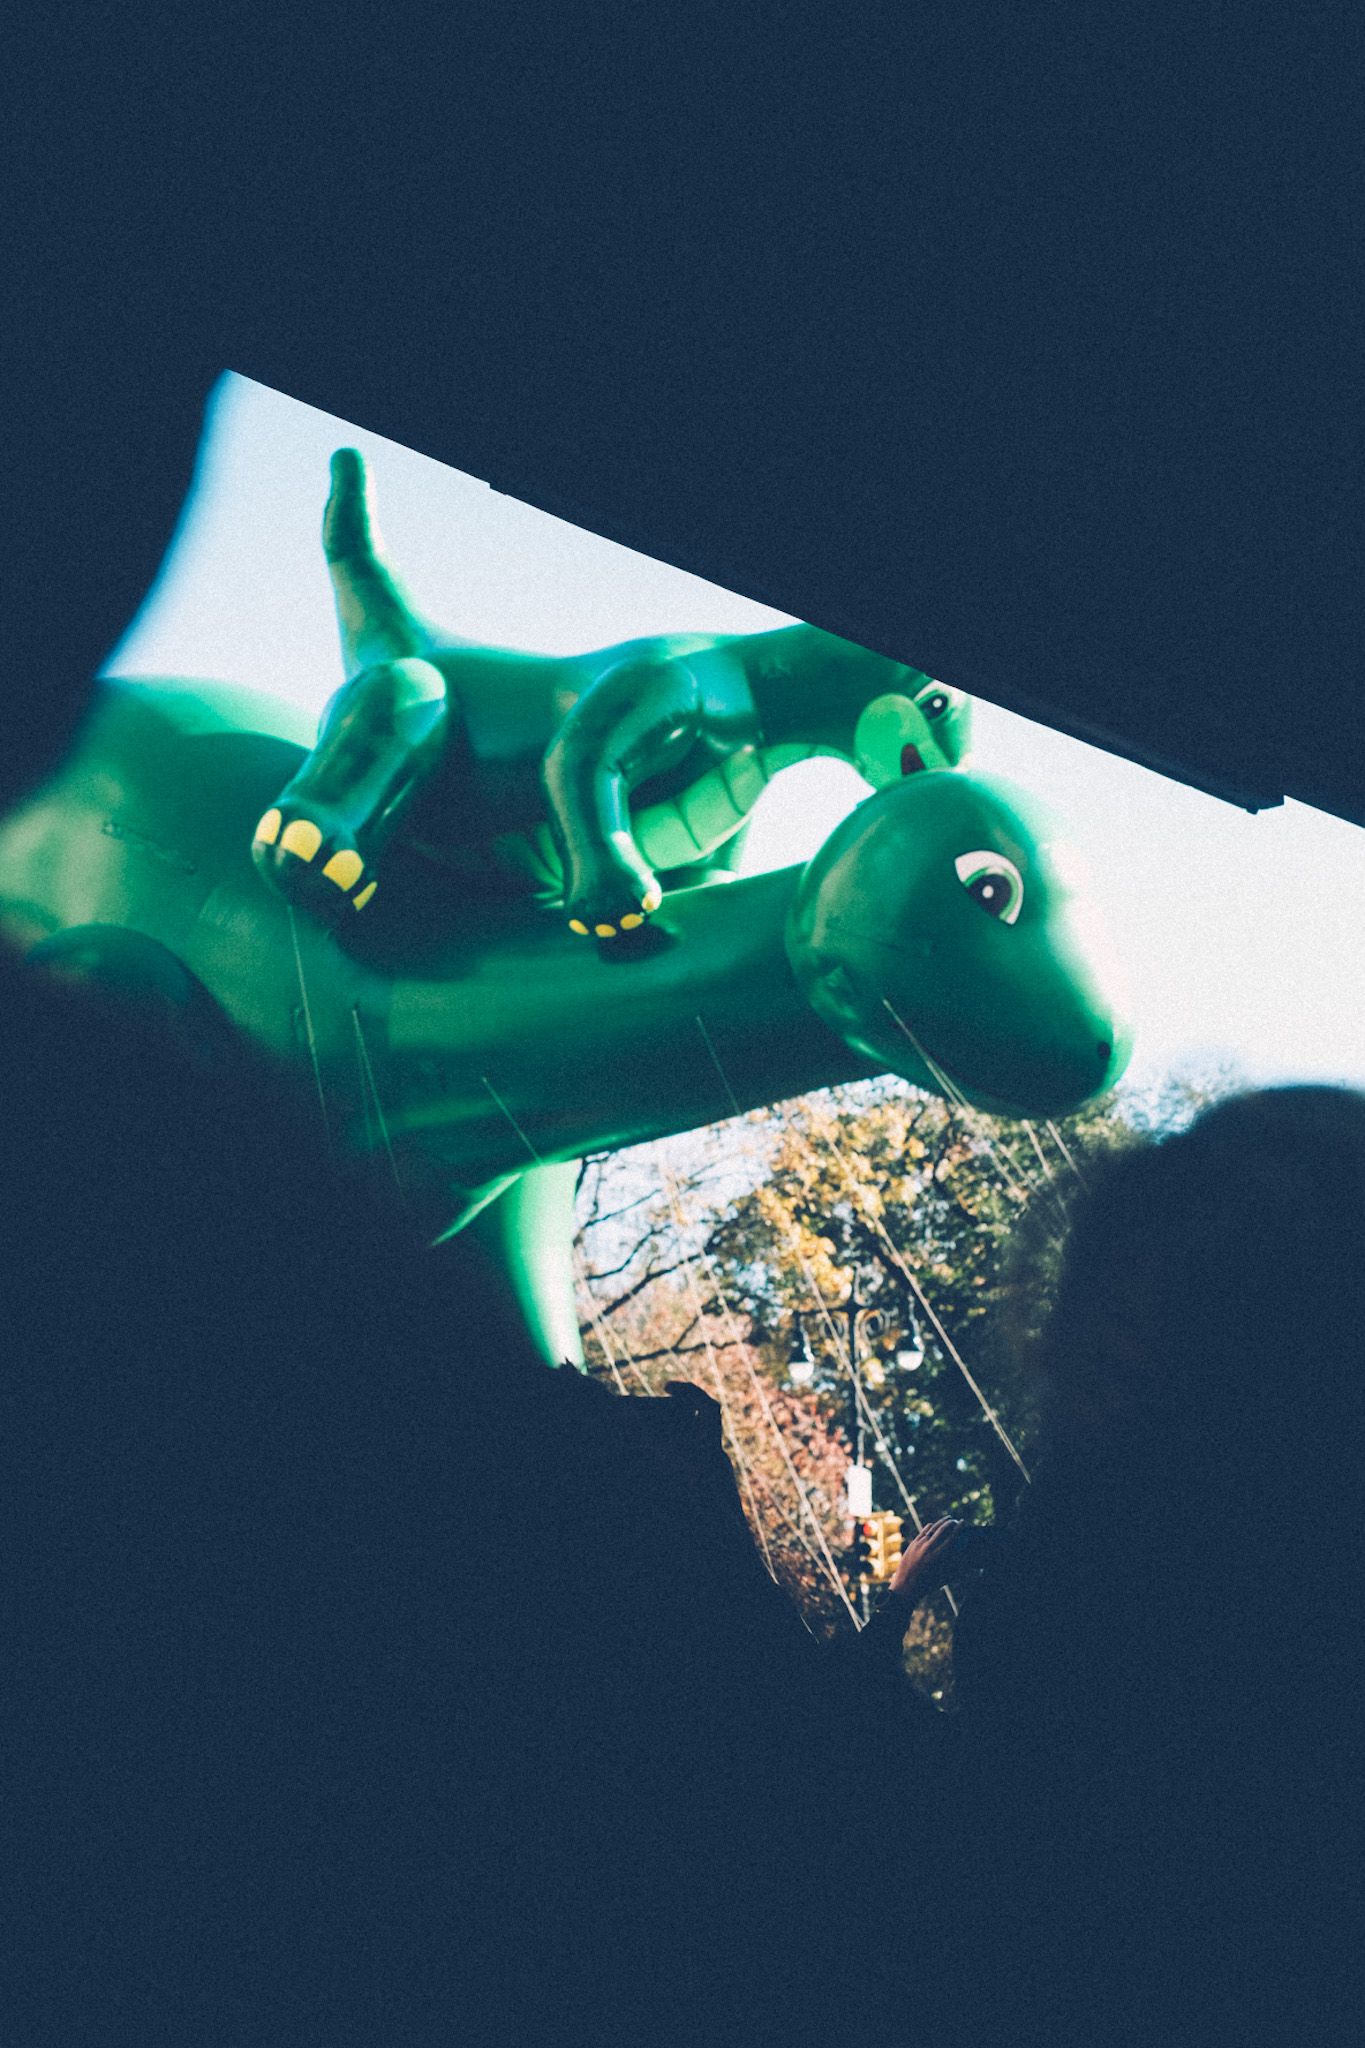 A green dinosaur balloon with a smaller dinosaur balloon on its back floats in the Macy’s Thanksgiving Day Parade.